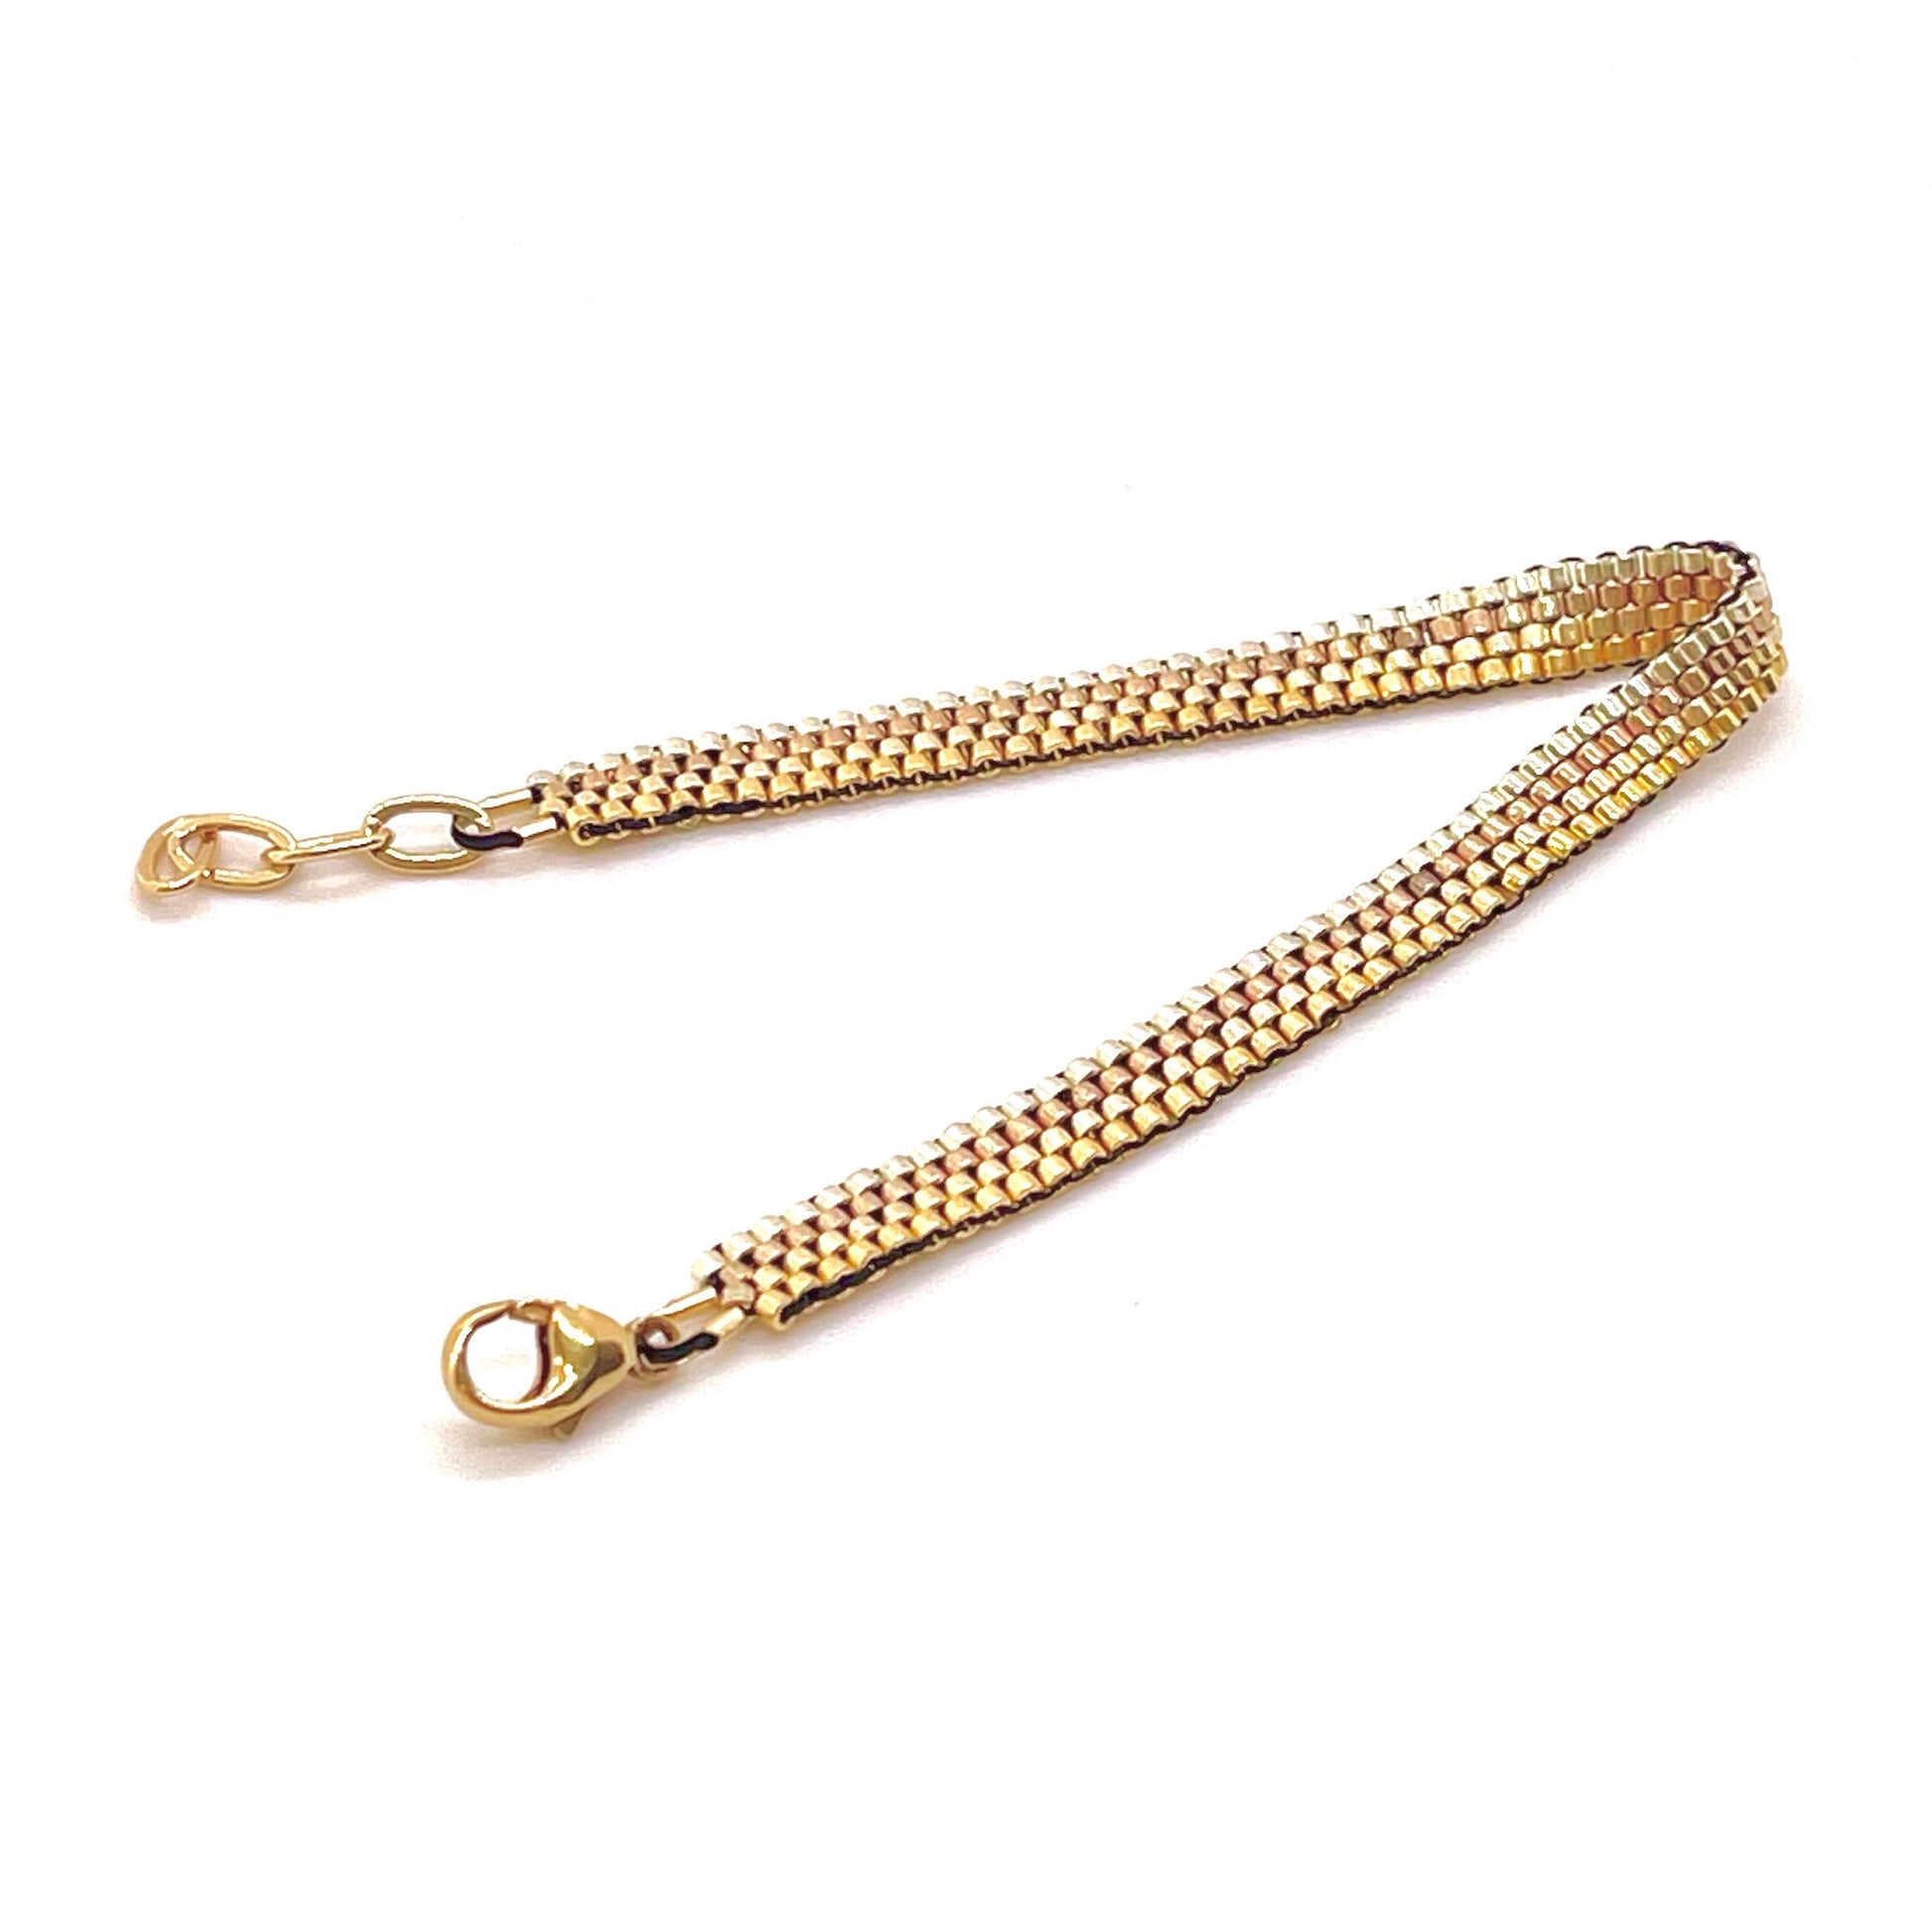 Woven beads bracelet with tiny gold and silver seed beads in a horizontal striped ombre pattern.